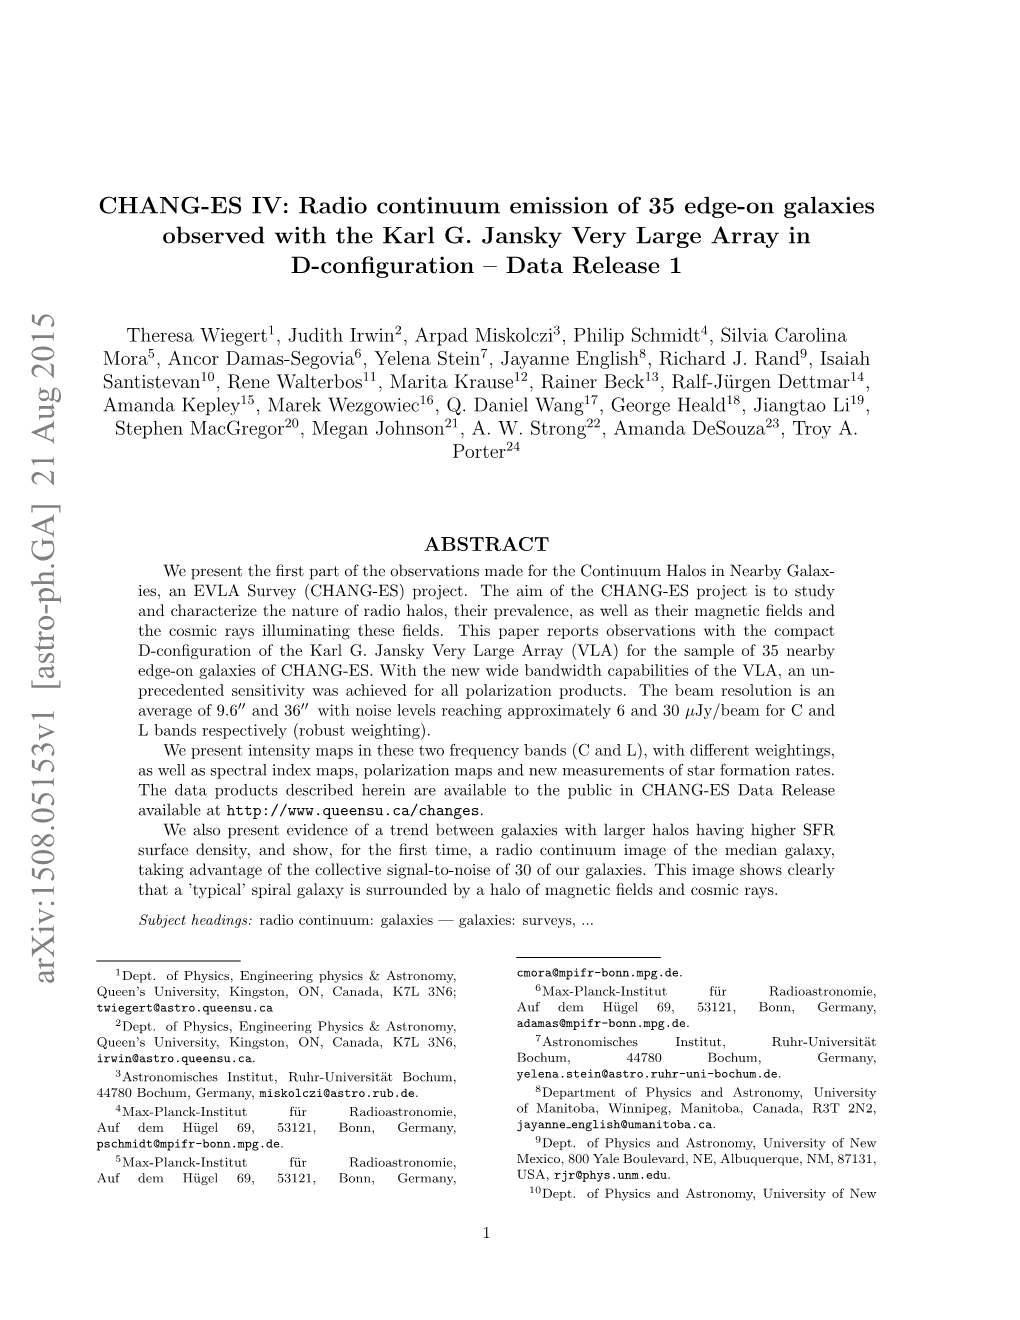 CHANG-ES IV: Radio Continuum Emission of 35 Edge-On Galaxies Observed with the Karl G